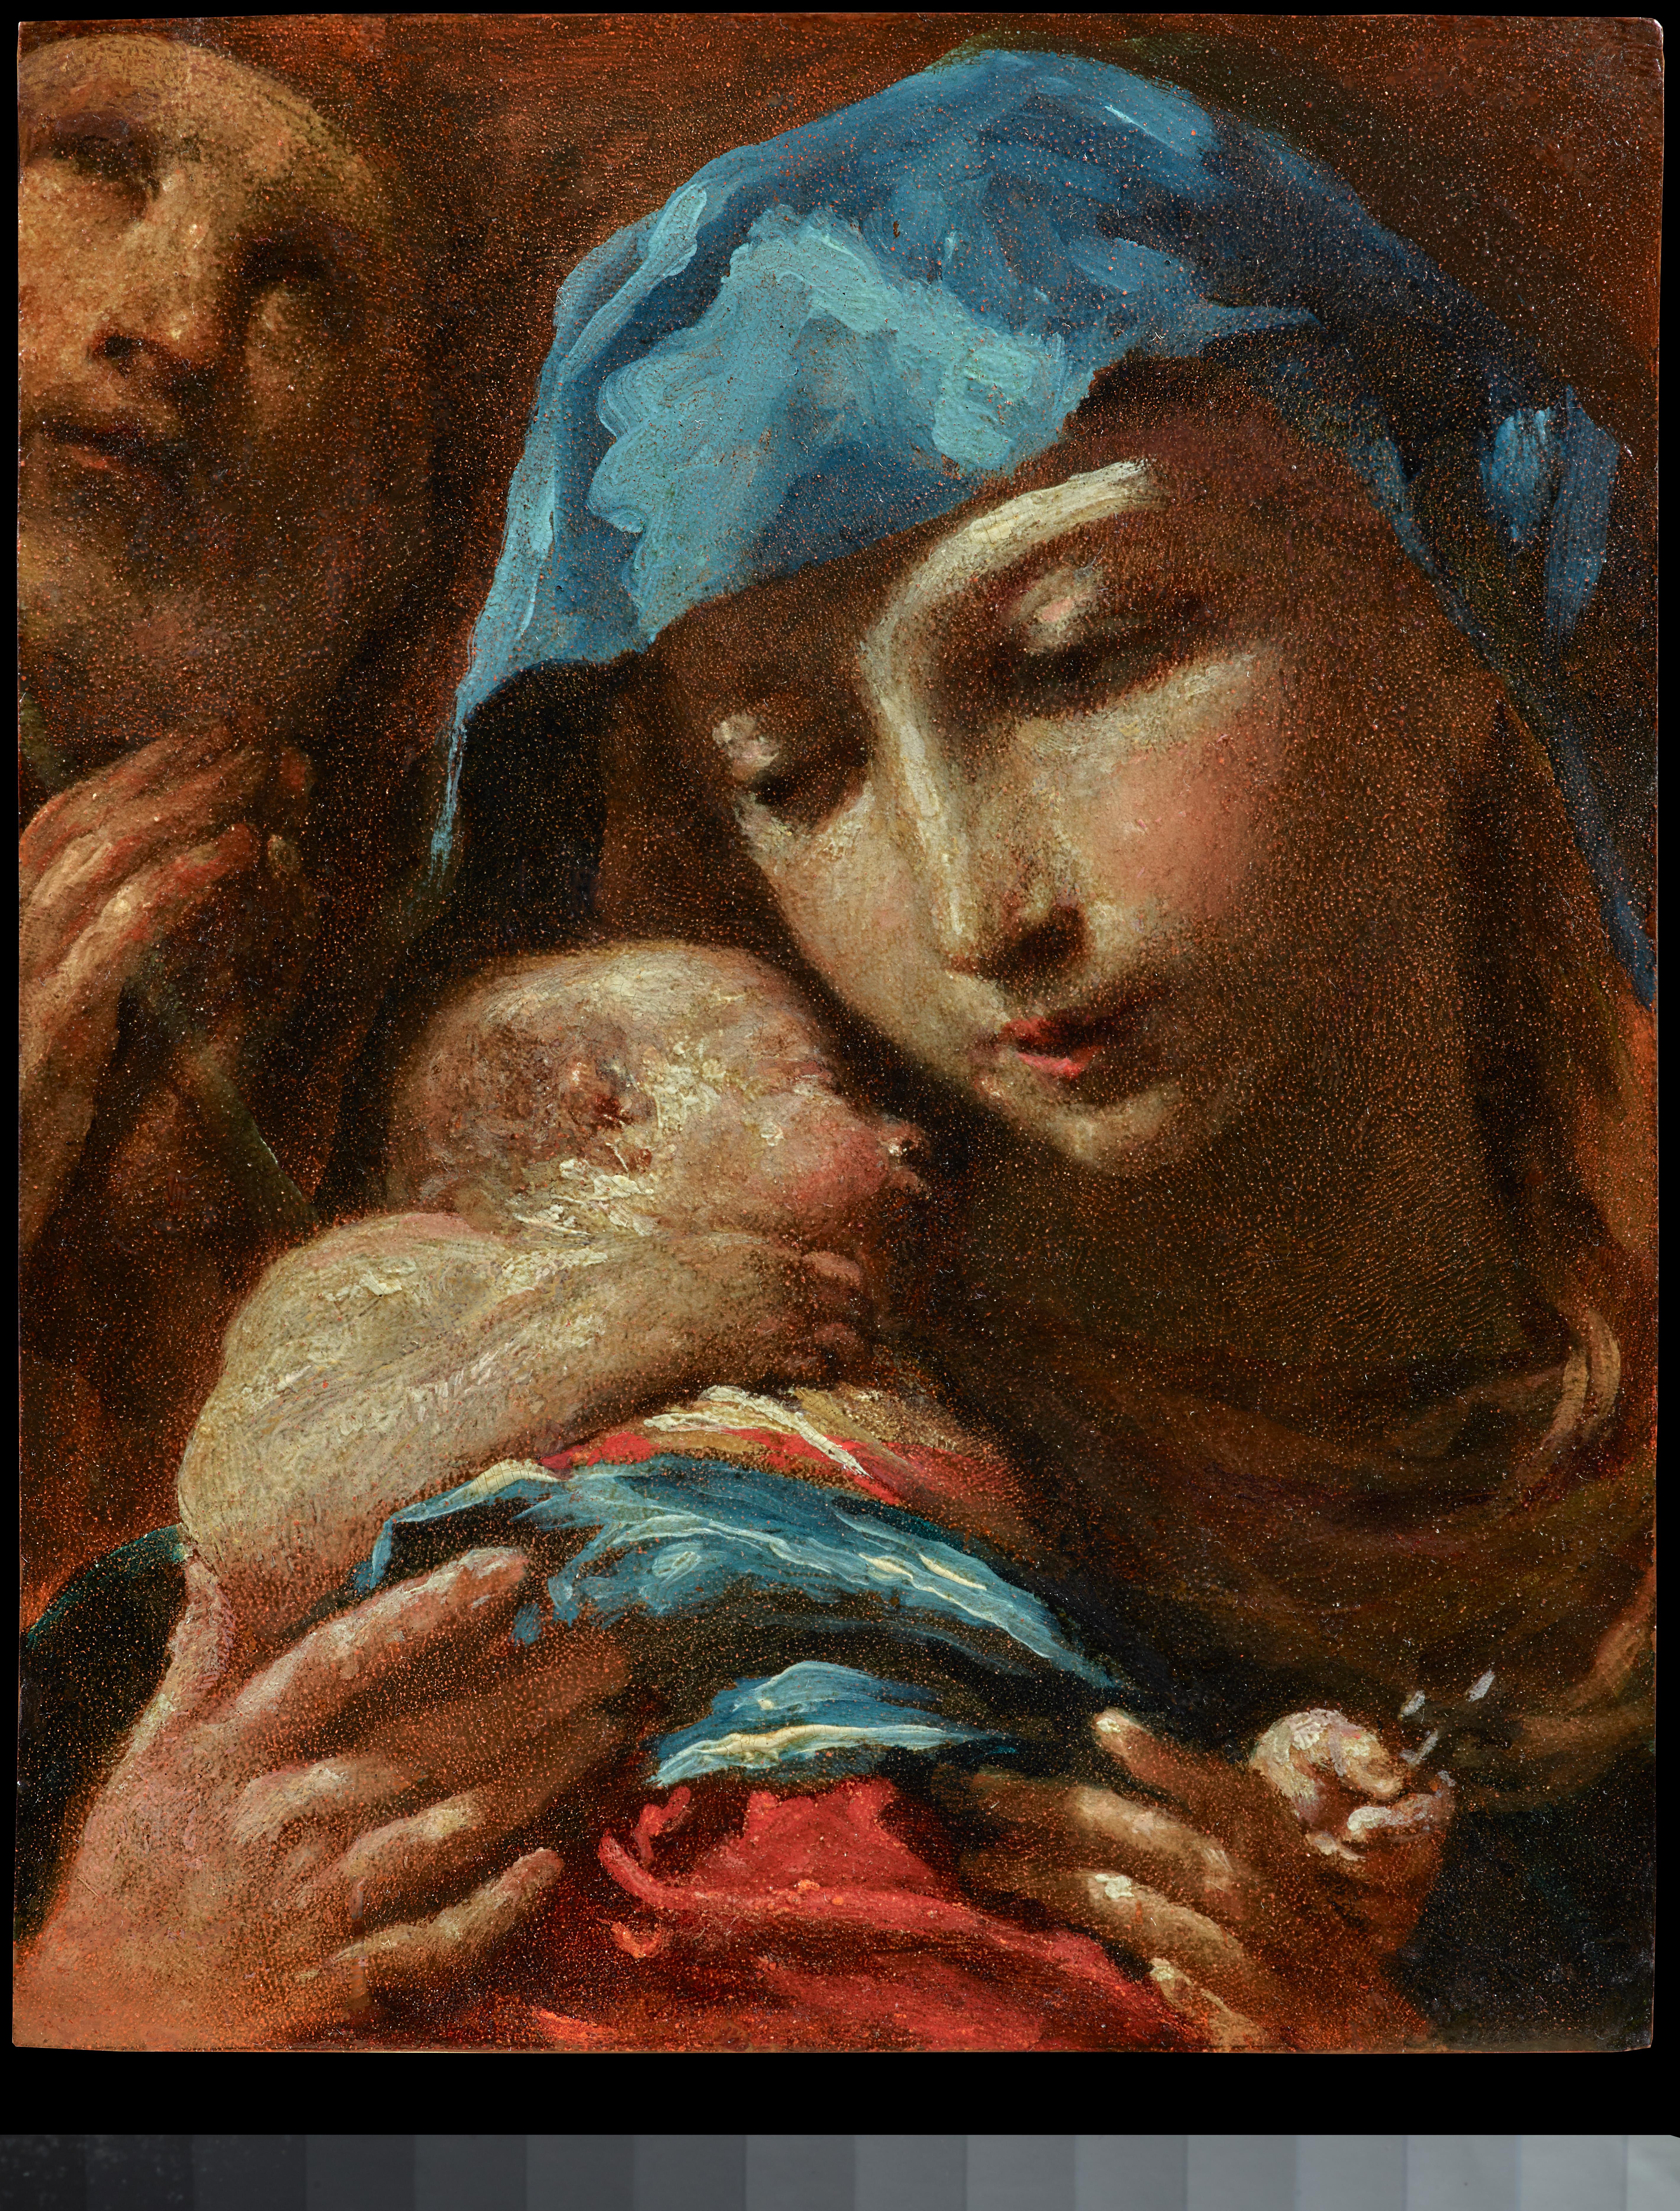 Holy Family, by the bolgonese master.  - Painting by Giuseppe Maria Crespi, called Lo Spagnuolo